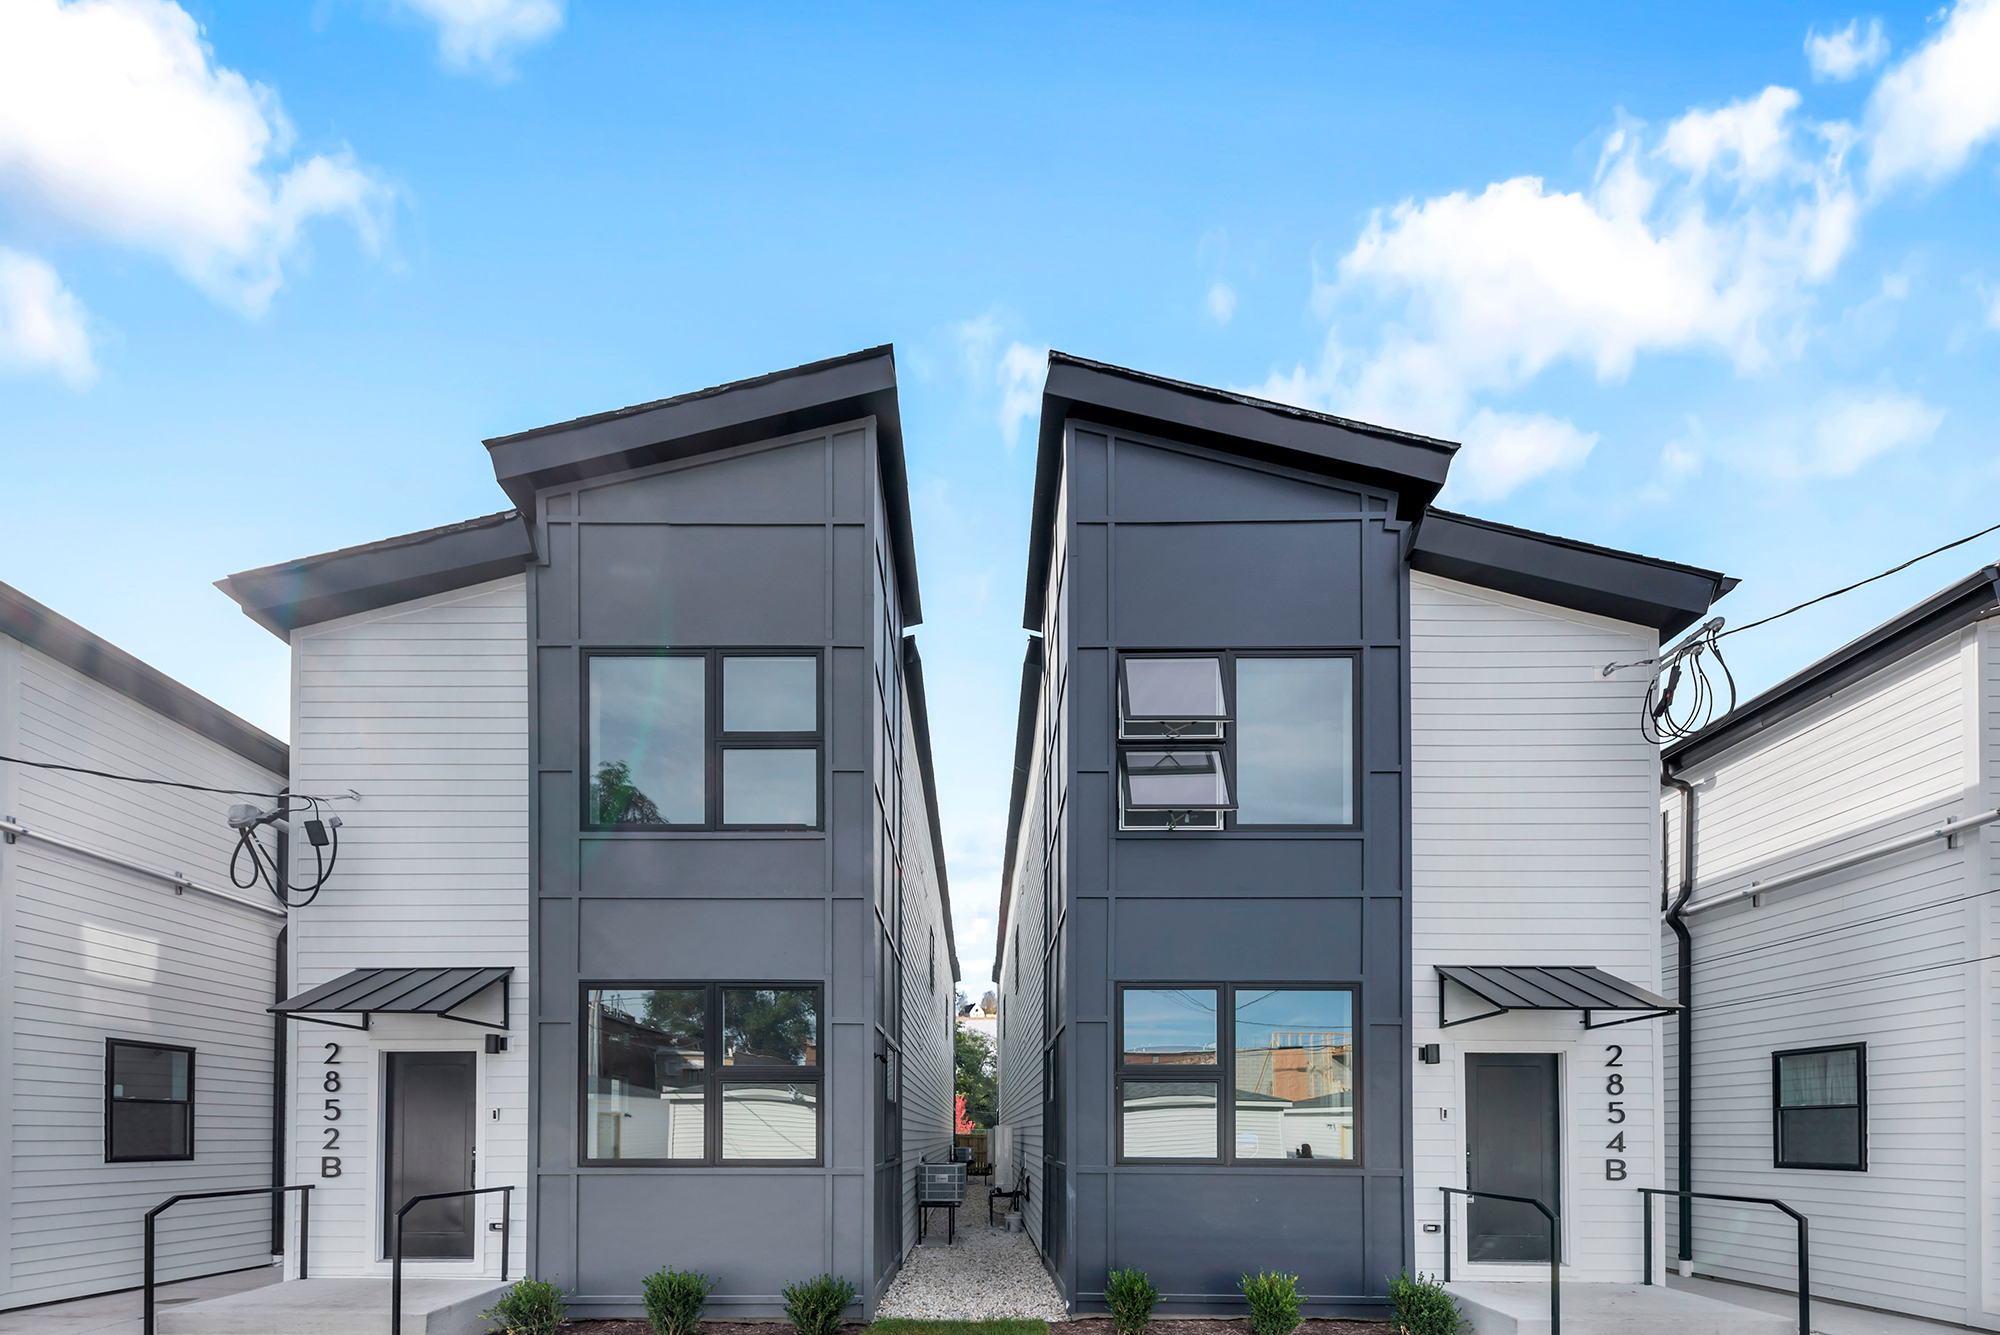 Structured Development's Harrison Row Townhomes modular project exterior